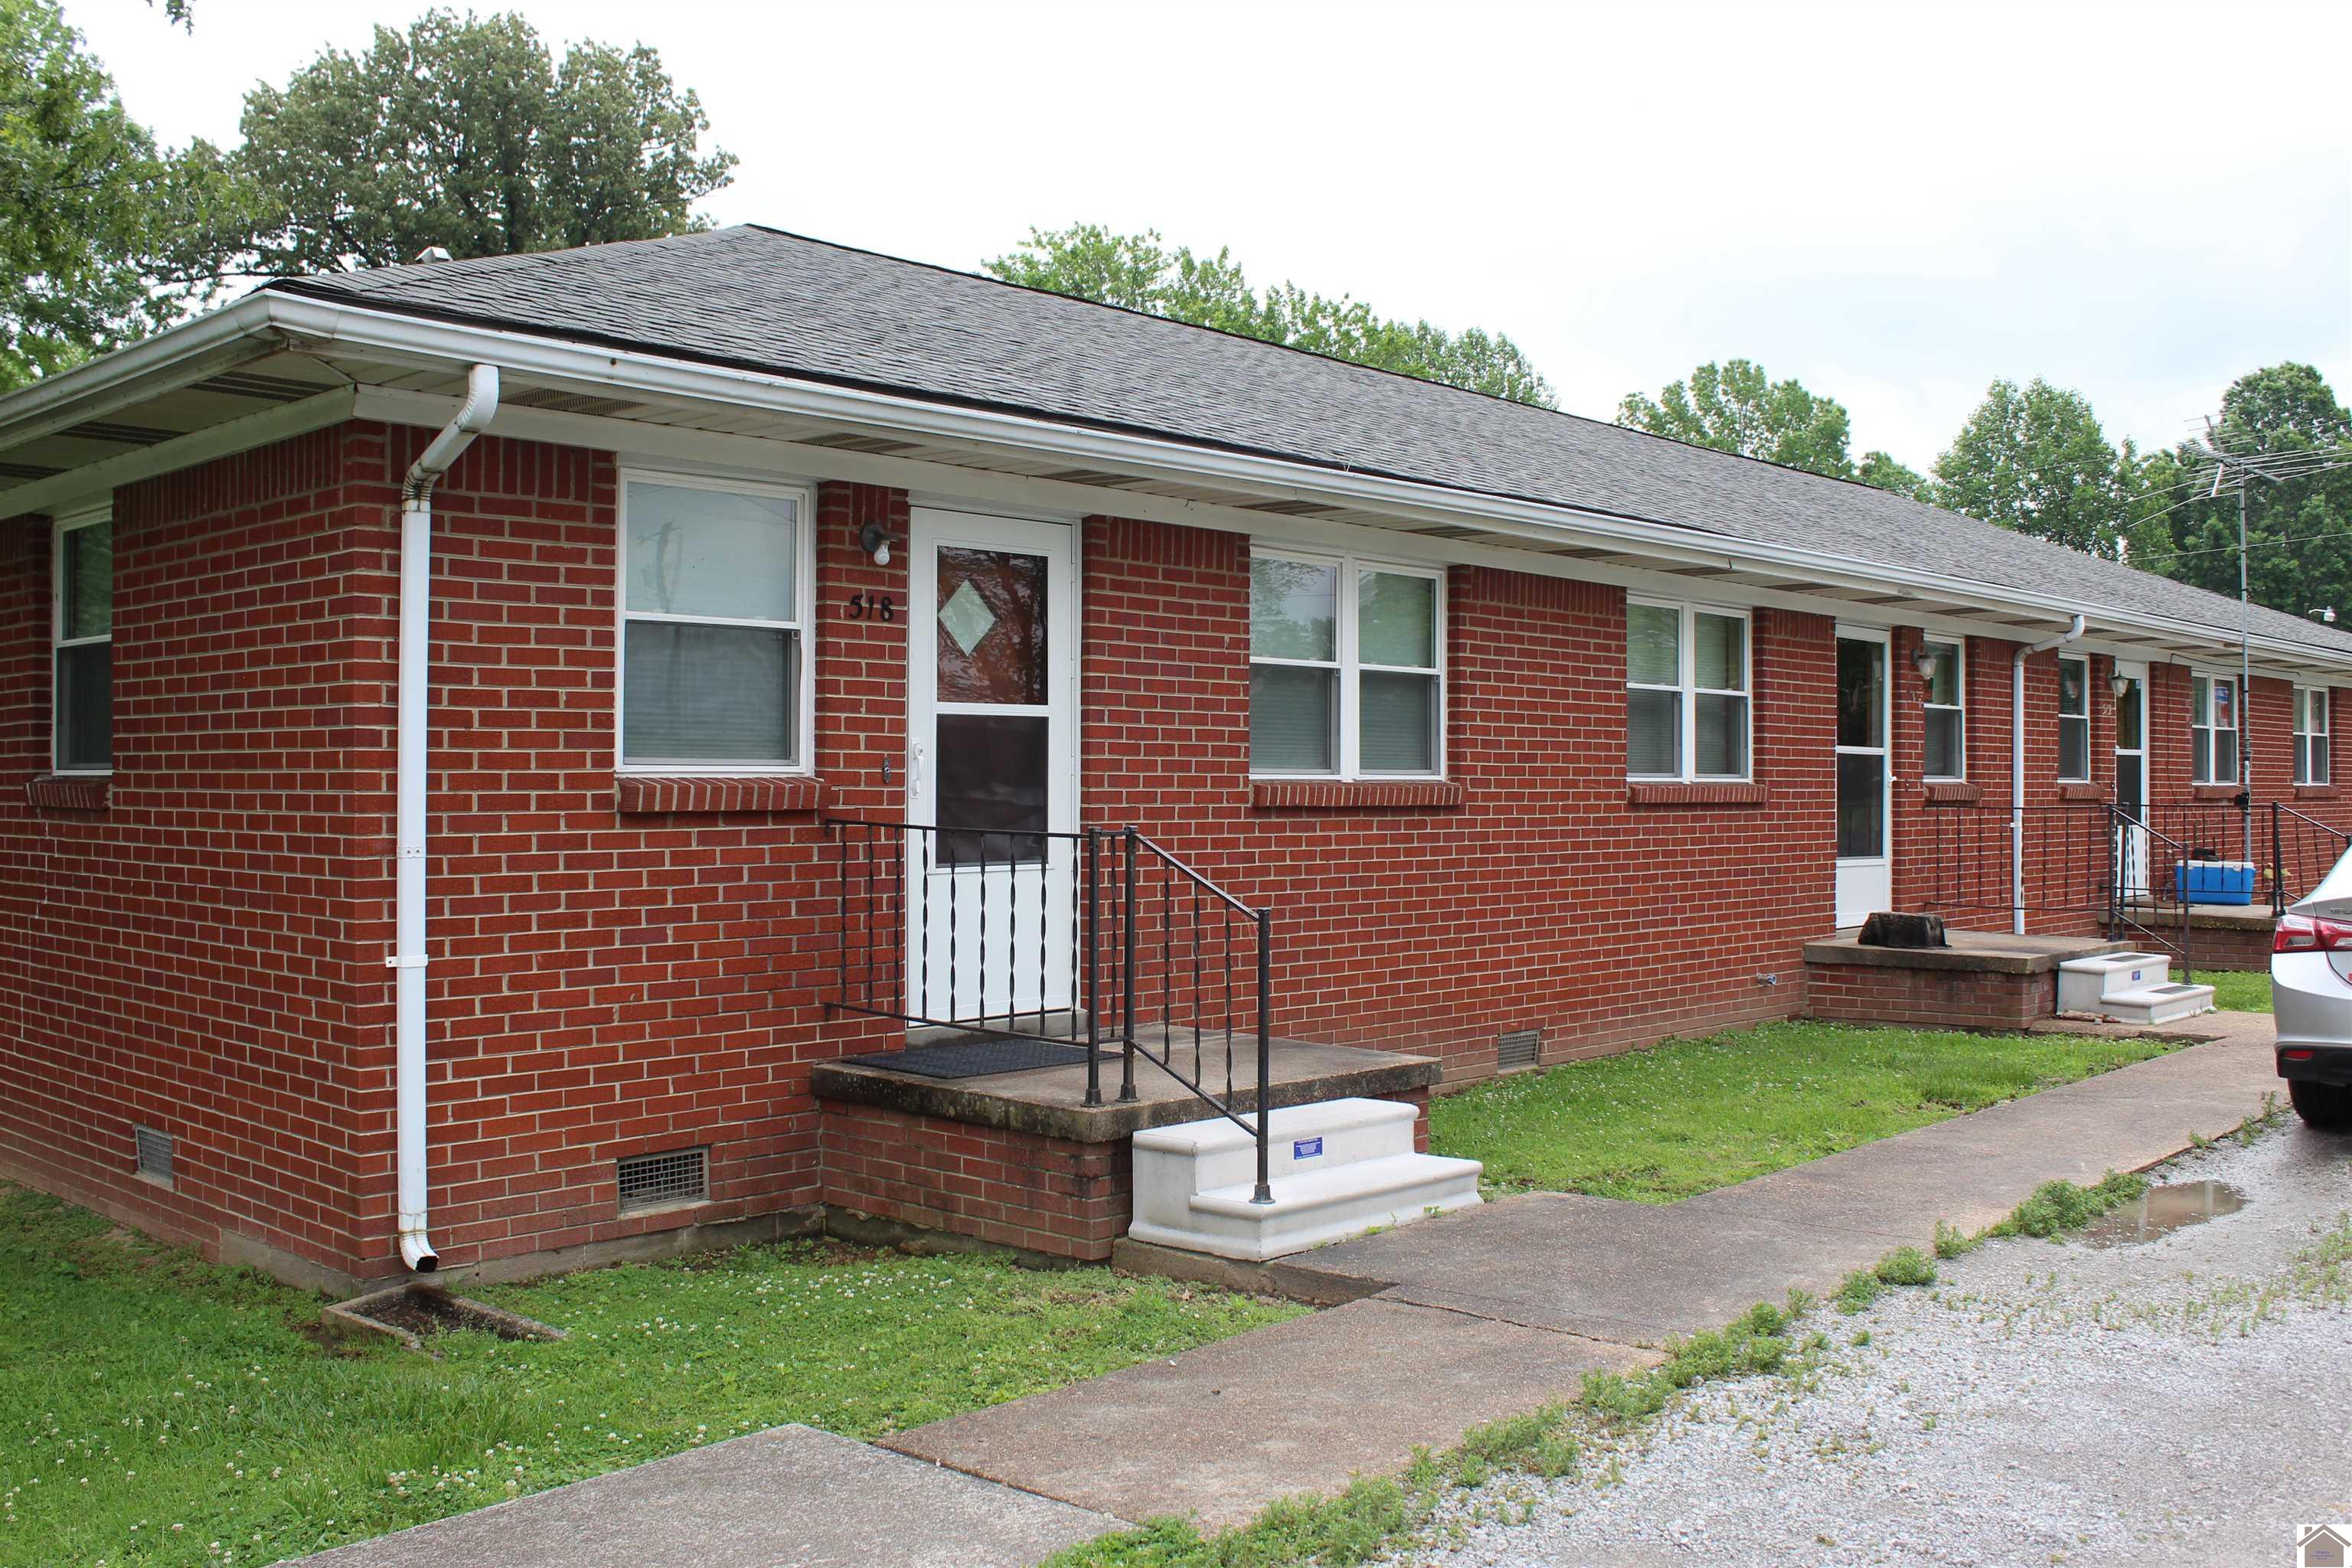 106-130 East 5th, LaCenter, KY 42056 Listing Photo  6